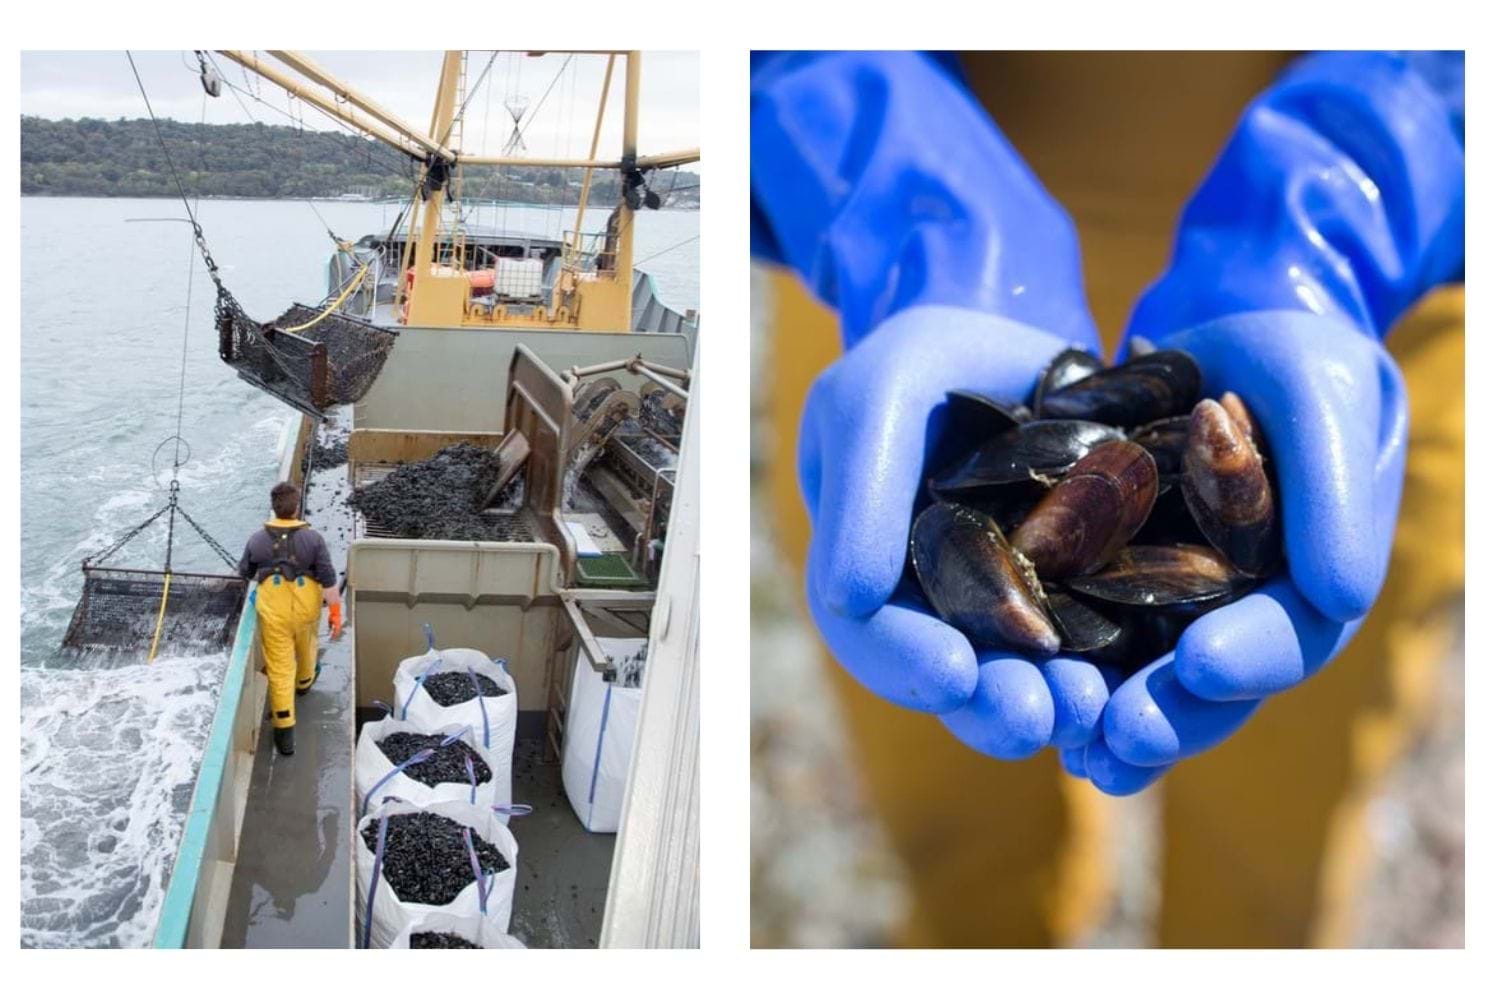 Photos of fishermen working on vessel harvesting mussels and mussels held in gloved hands